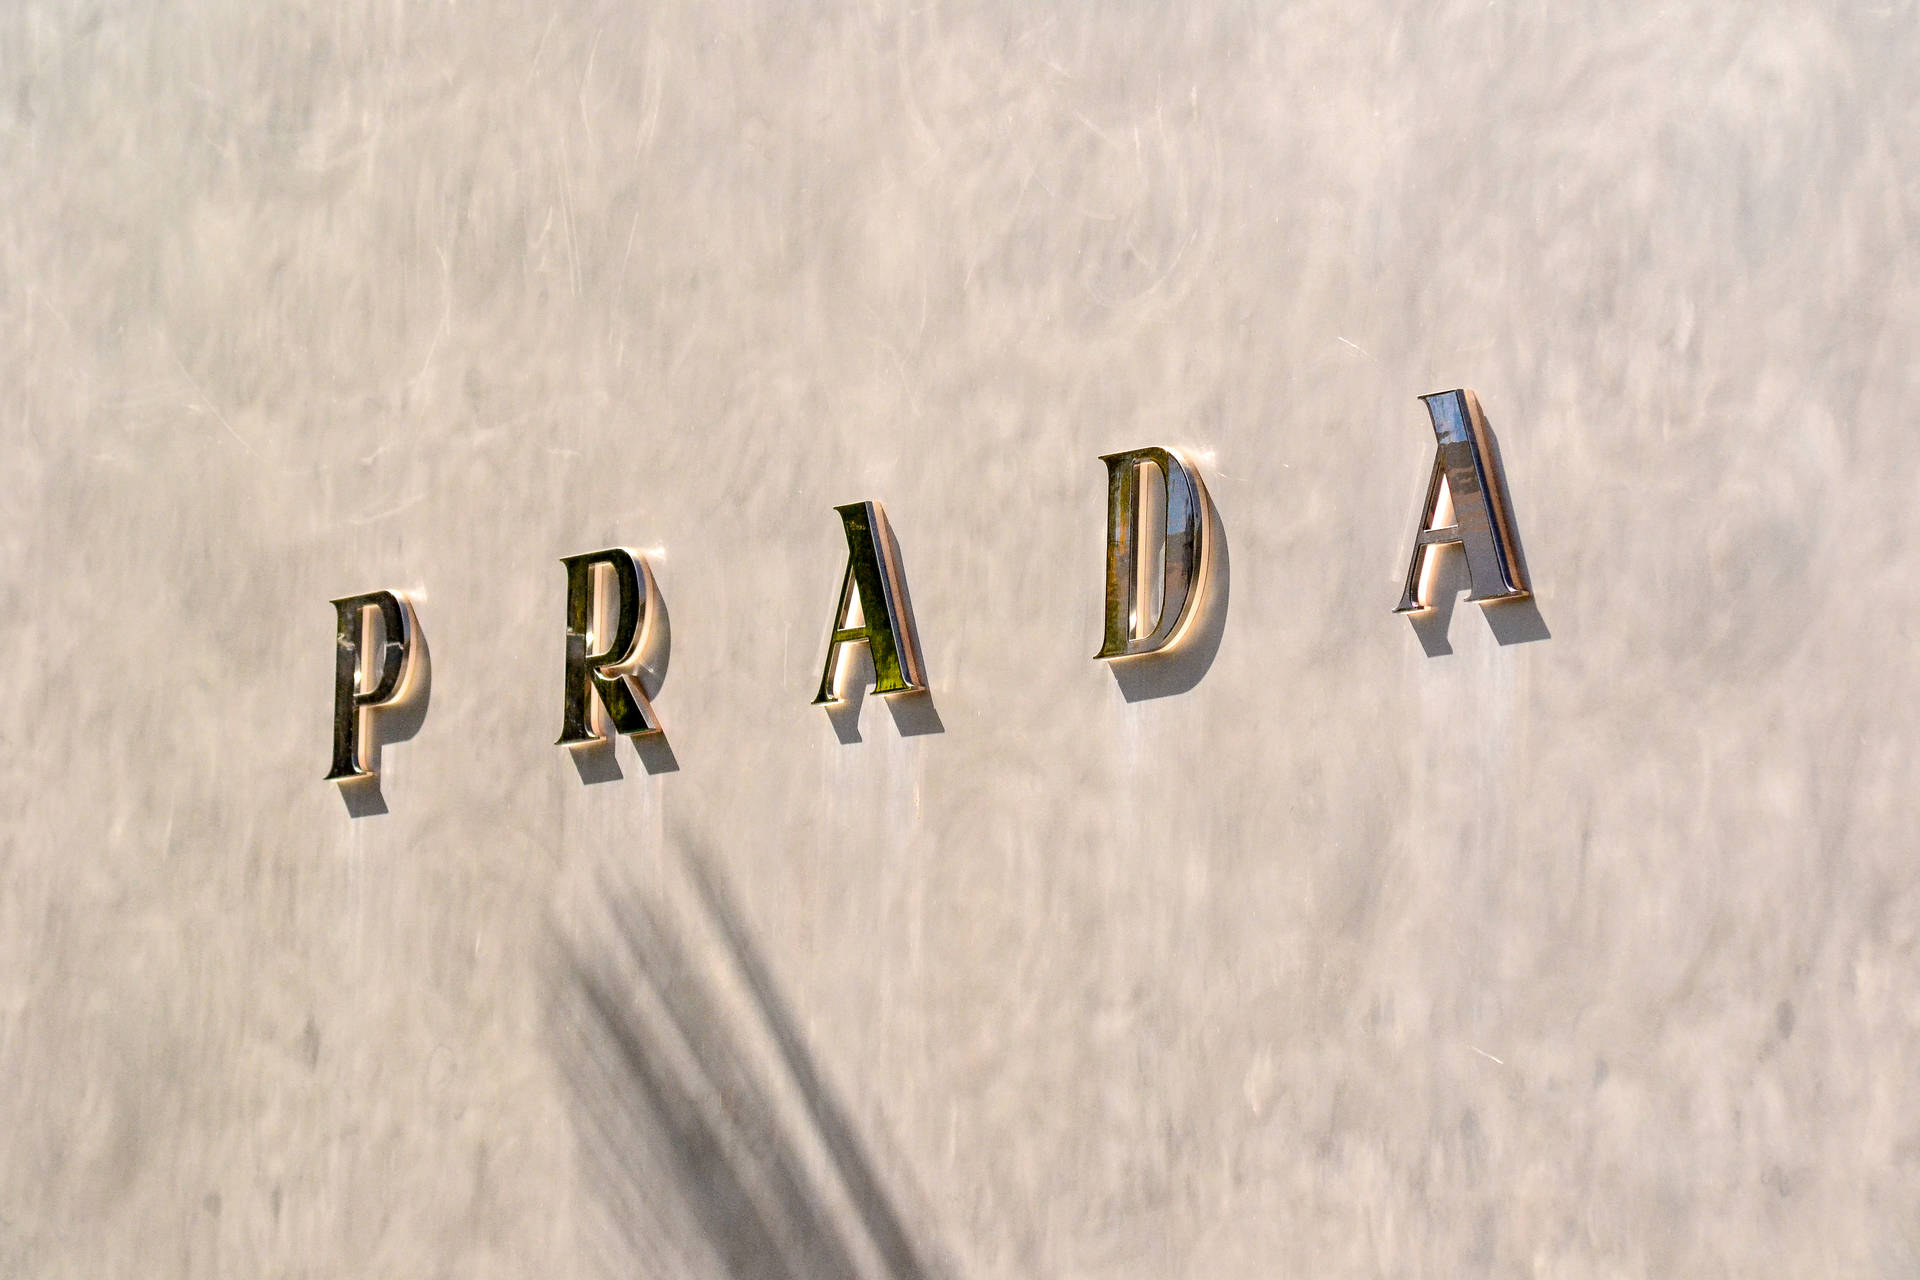 Prada Gold Letters On Wall Background